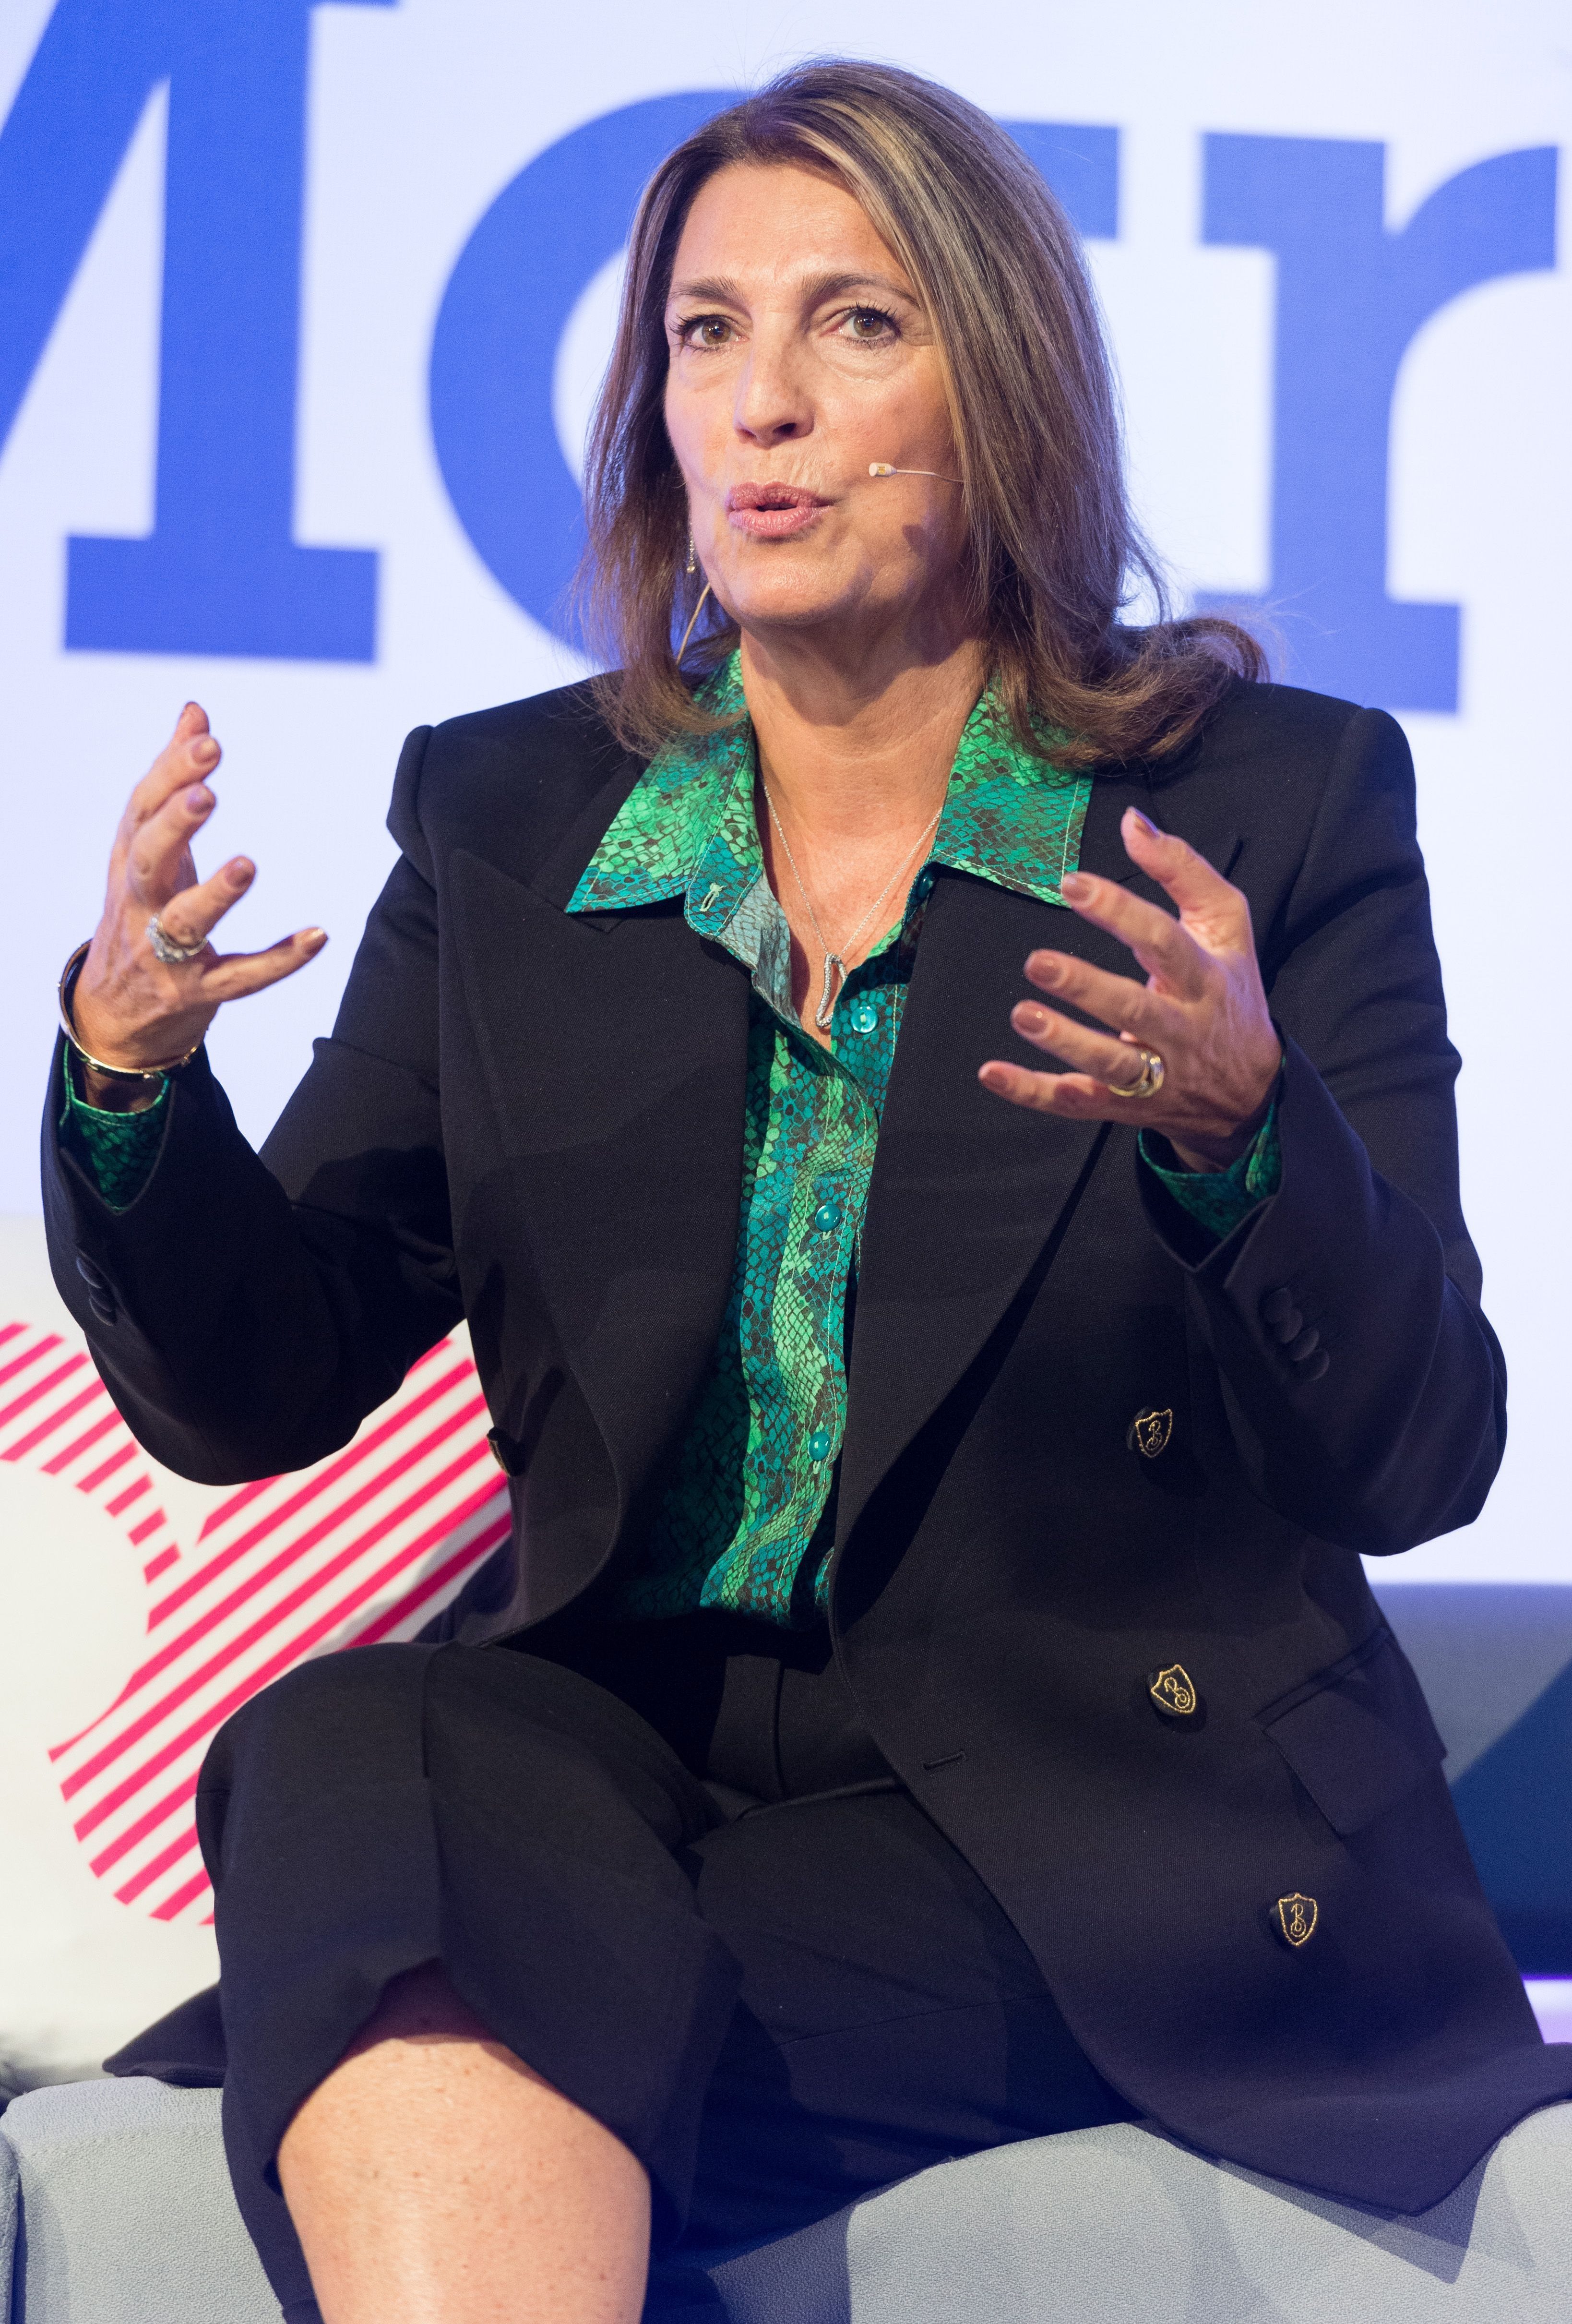 Dame Carolyn McCall is the Chief Executive of ITV